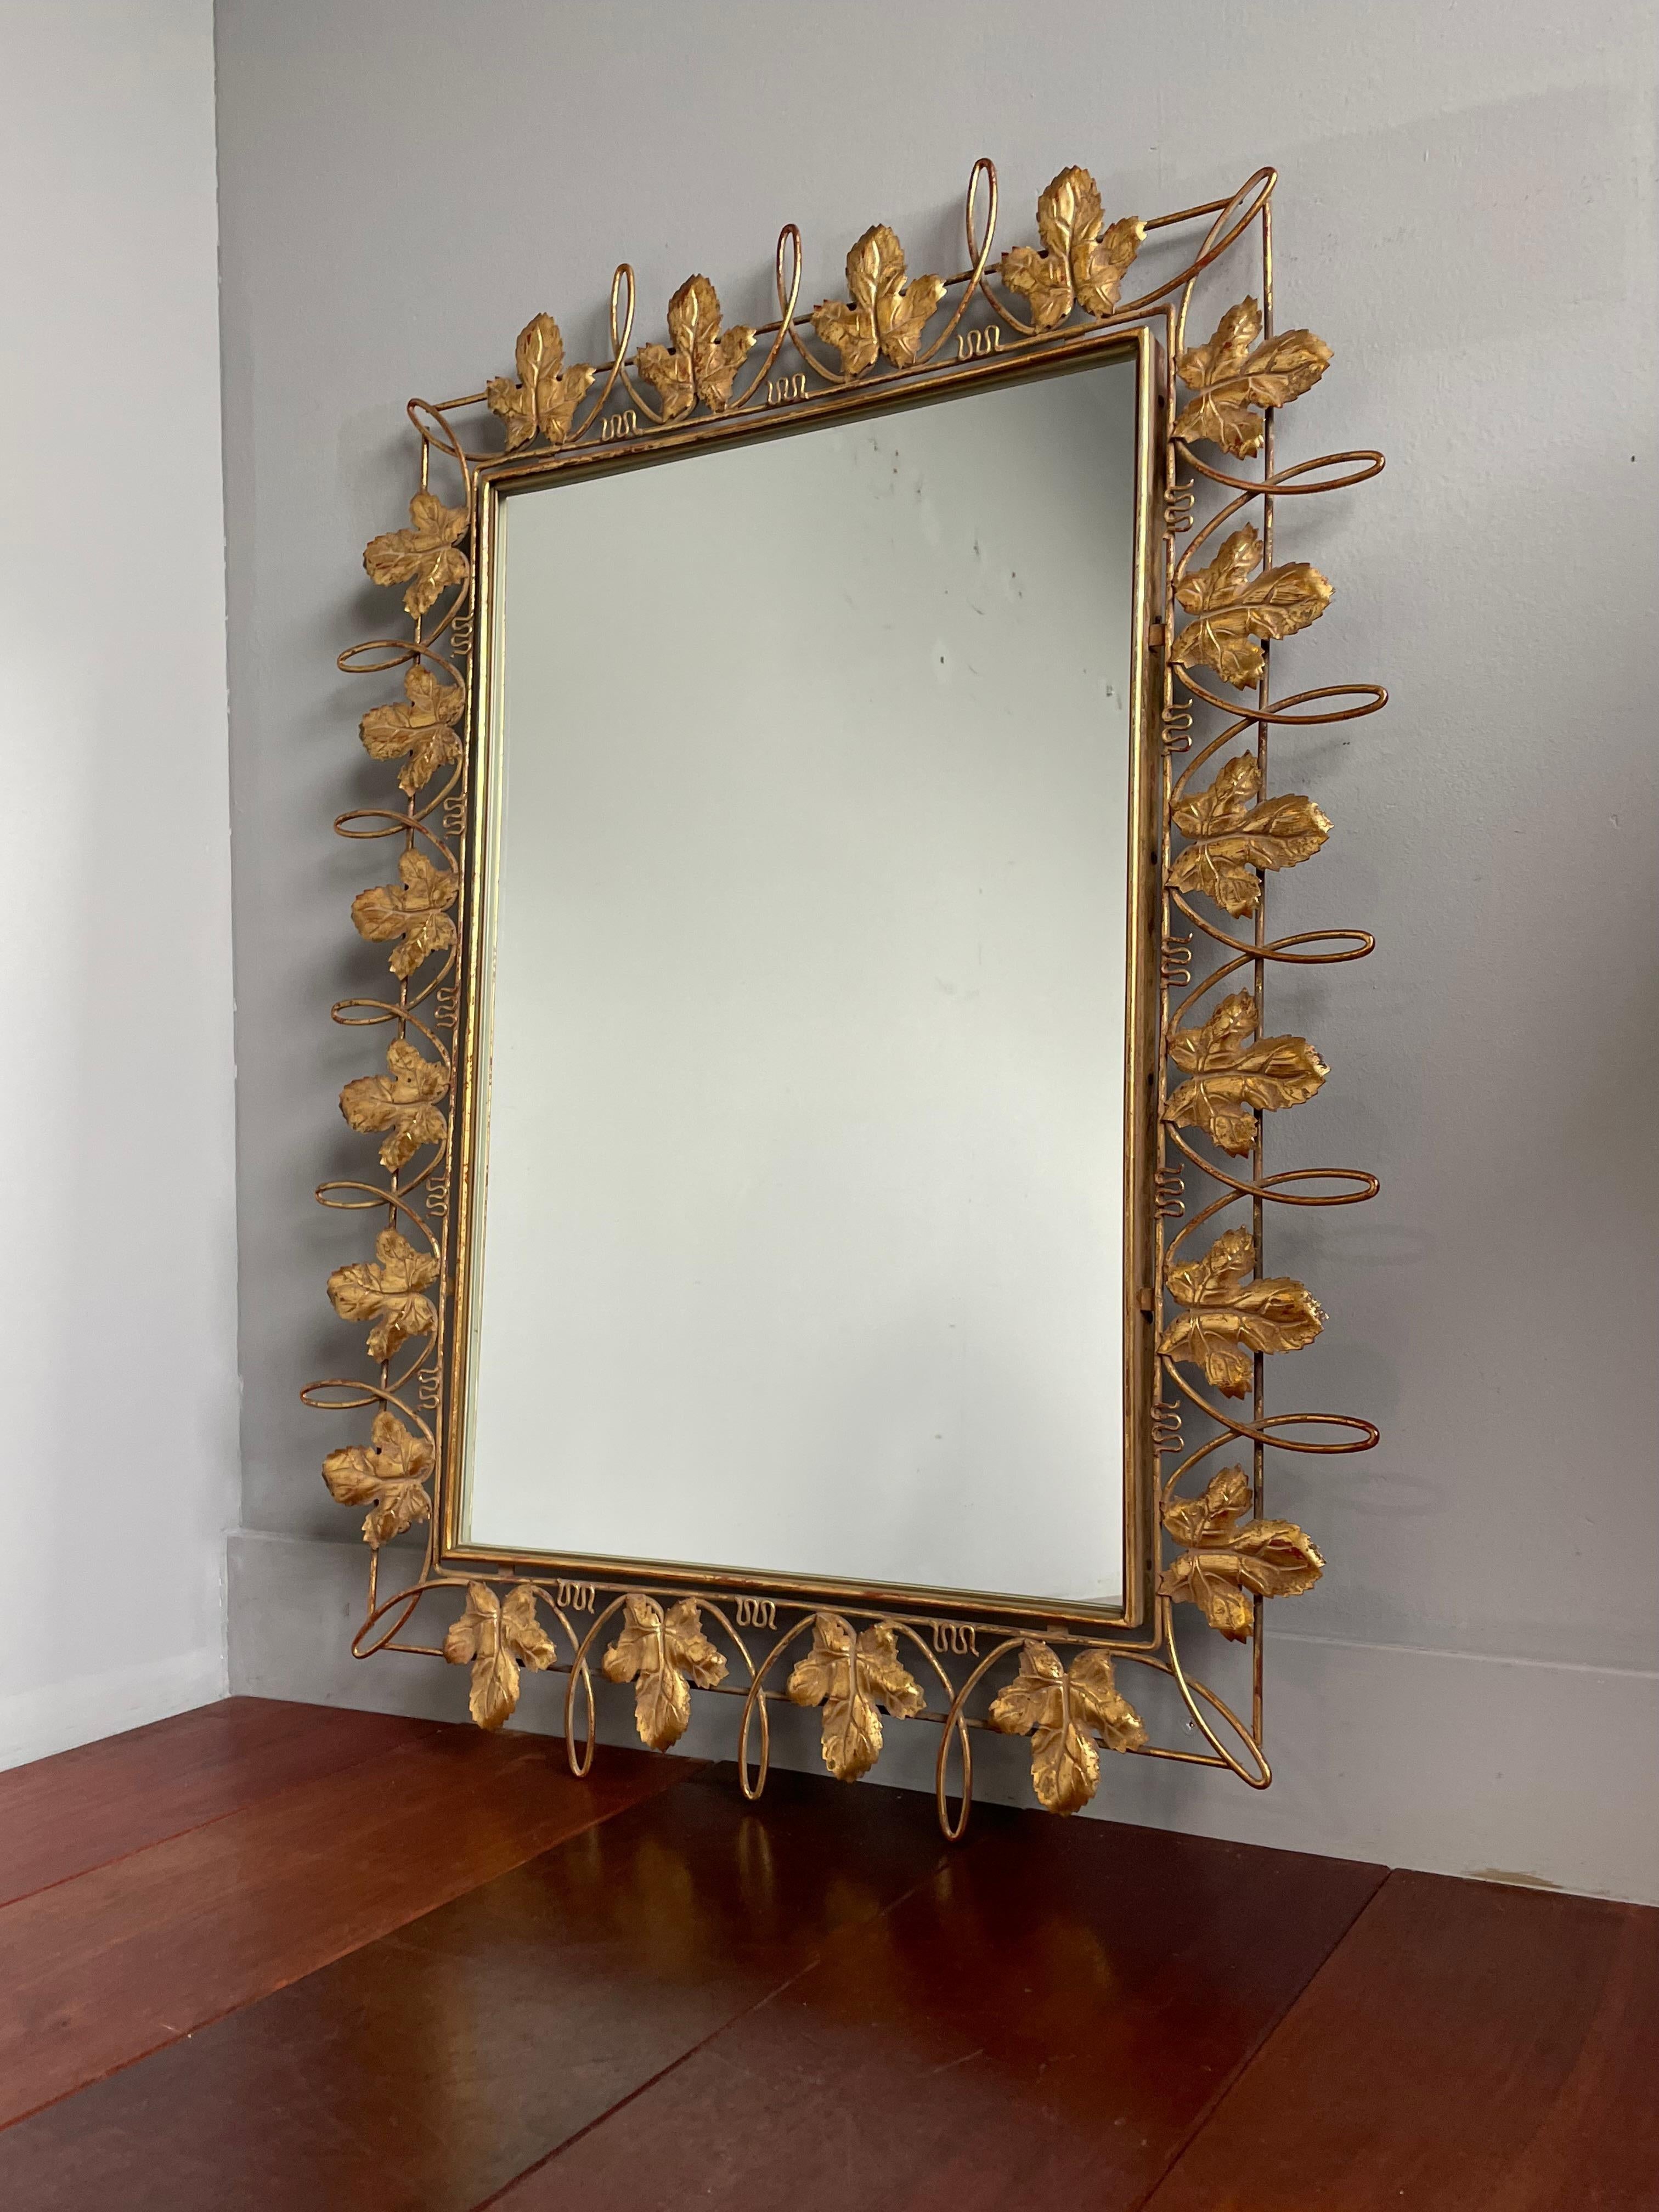 Striking wall mirror with handcrafted, golden colored grape leafs.

Via one of our foreign contacts we recently purchased this rare and decorative mirror with perfectly realistic grape leaf 'sculptures'. This all handcrafted work-of-art-mirror from